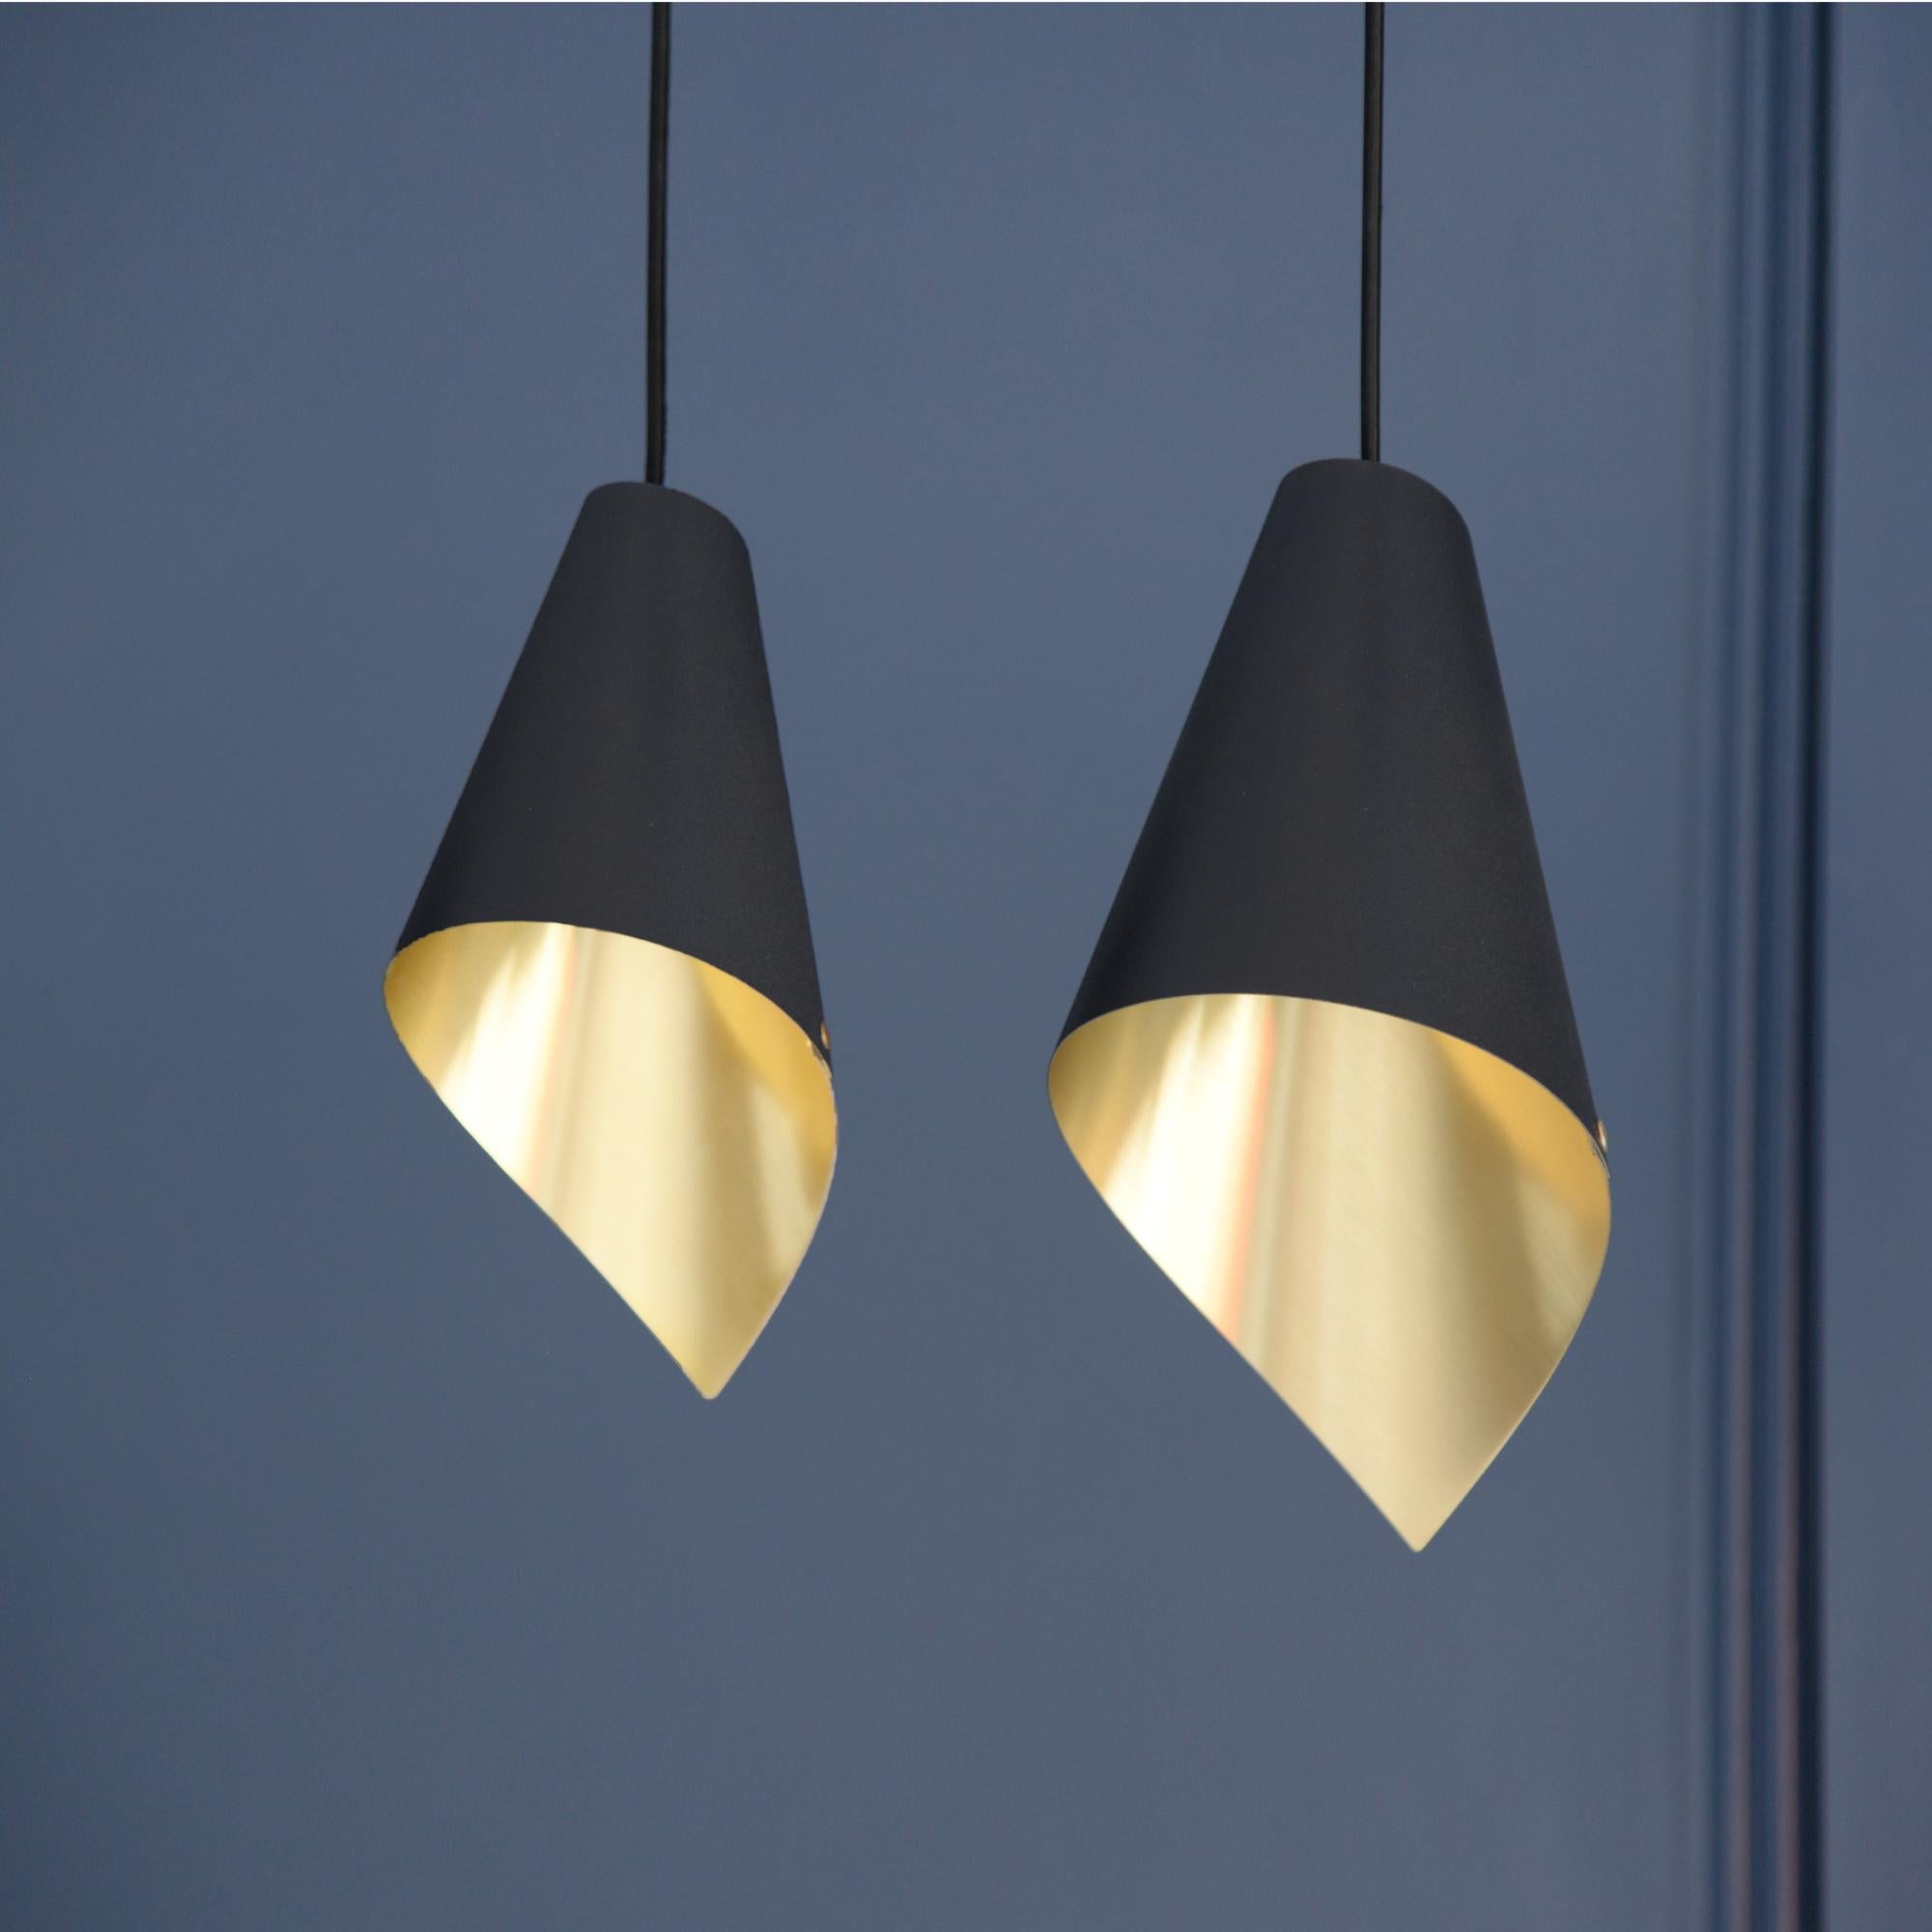 Modern ARC Ceiling Light Pendant in Black and Brushed Brass, Made in Britain For Sale